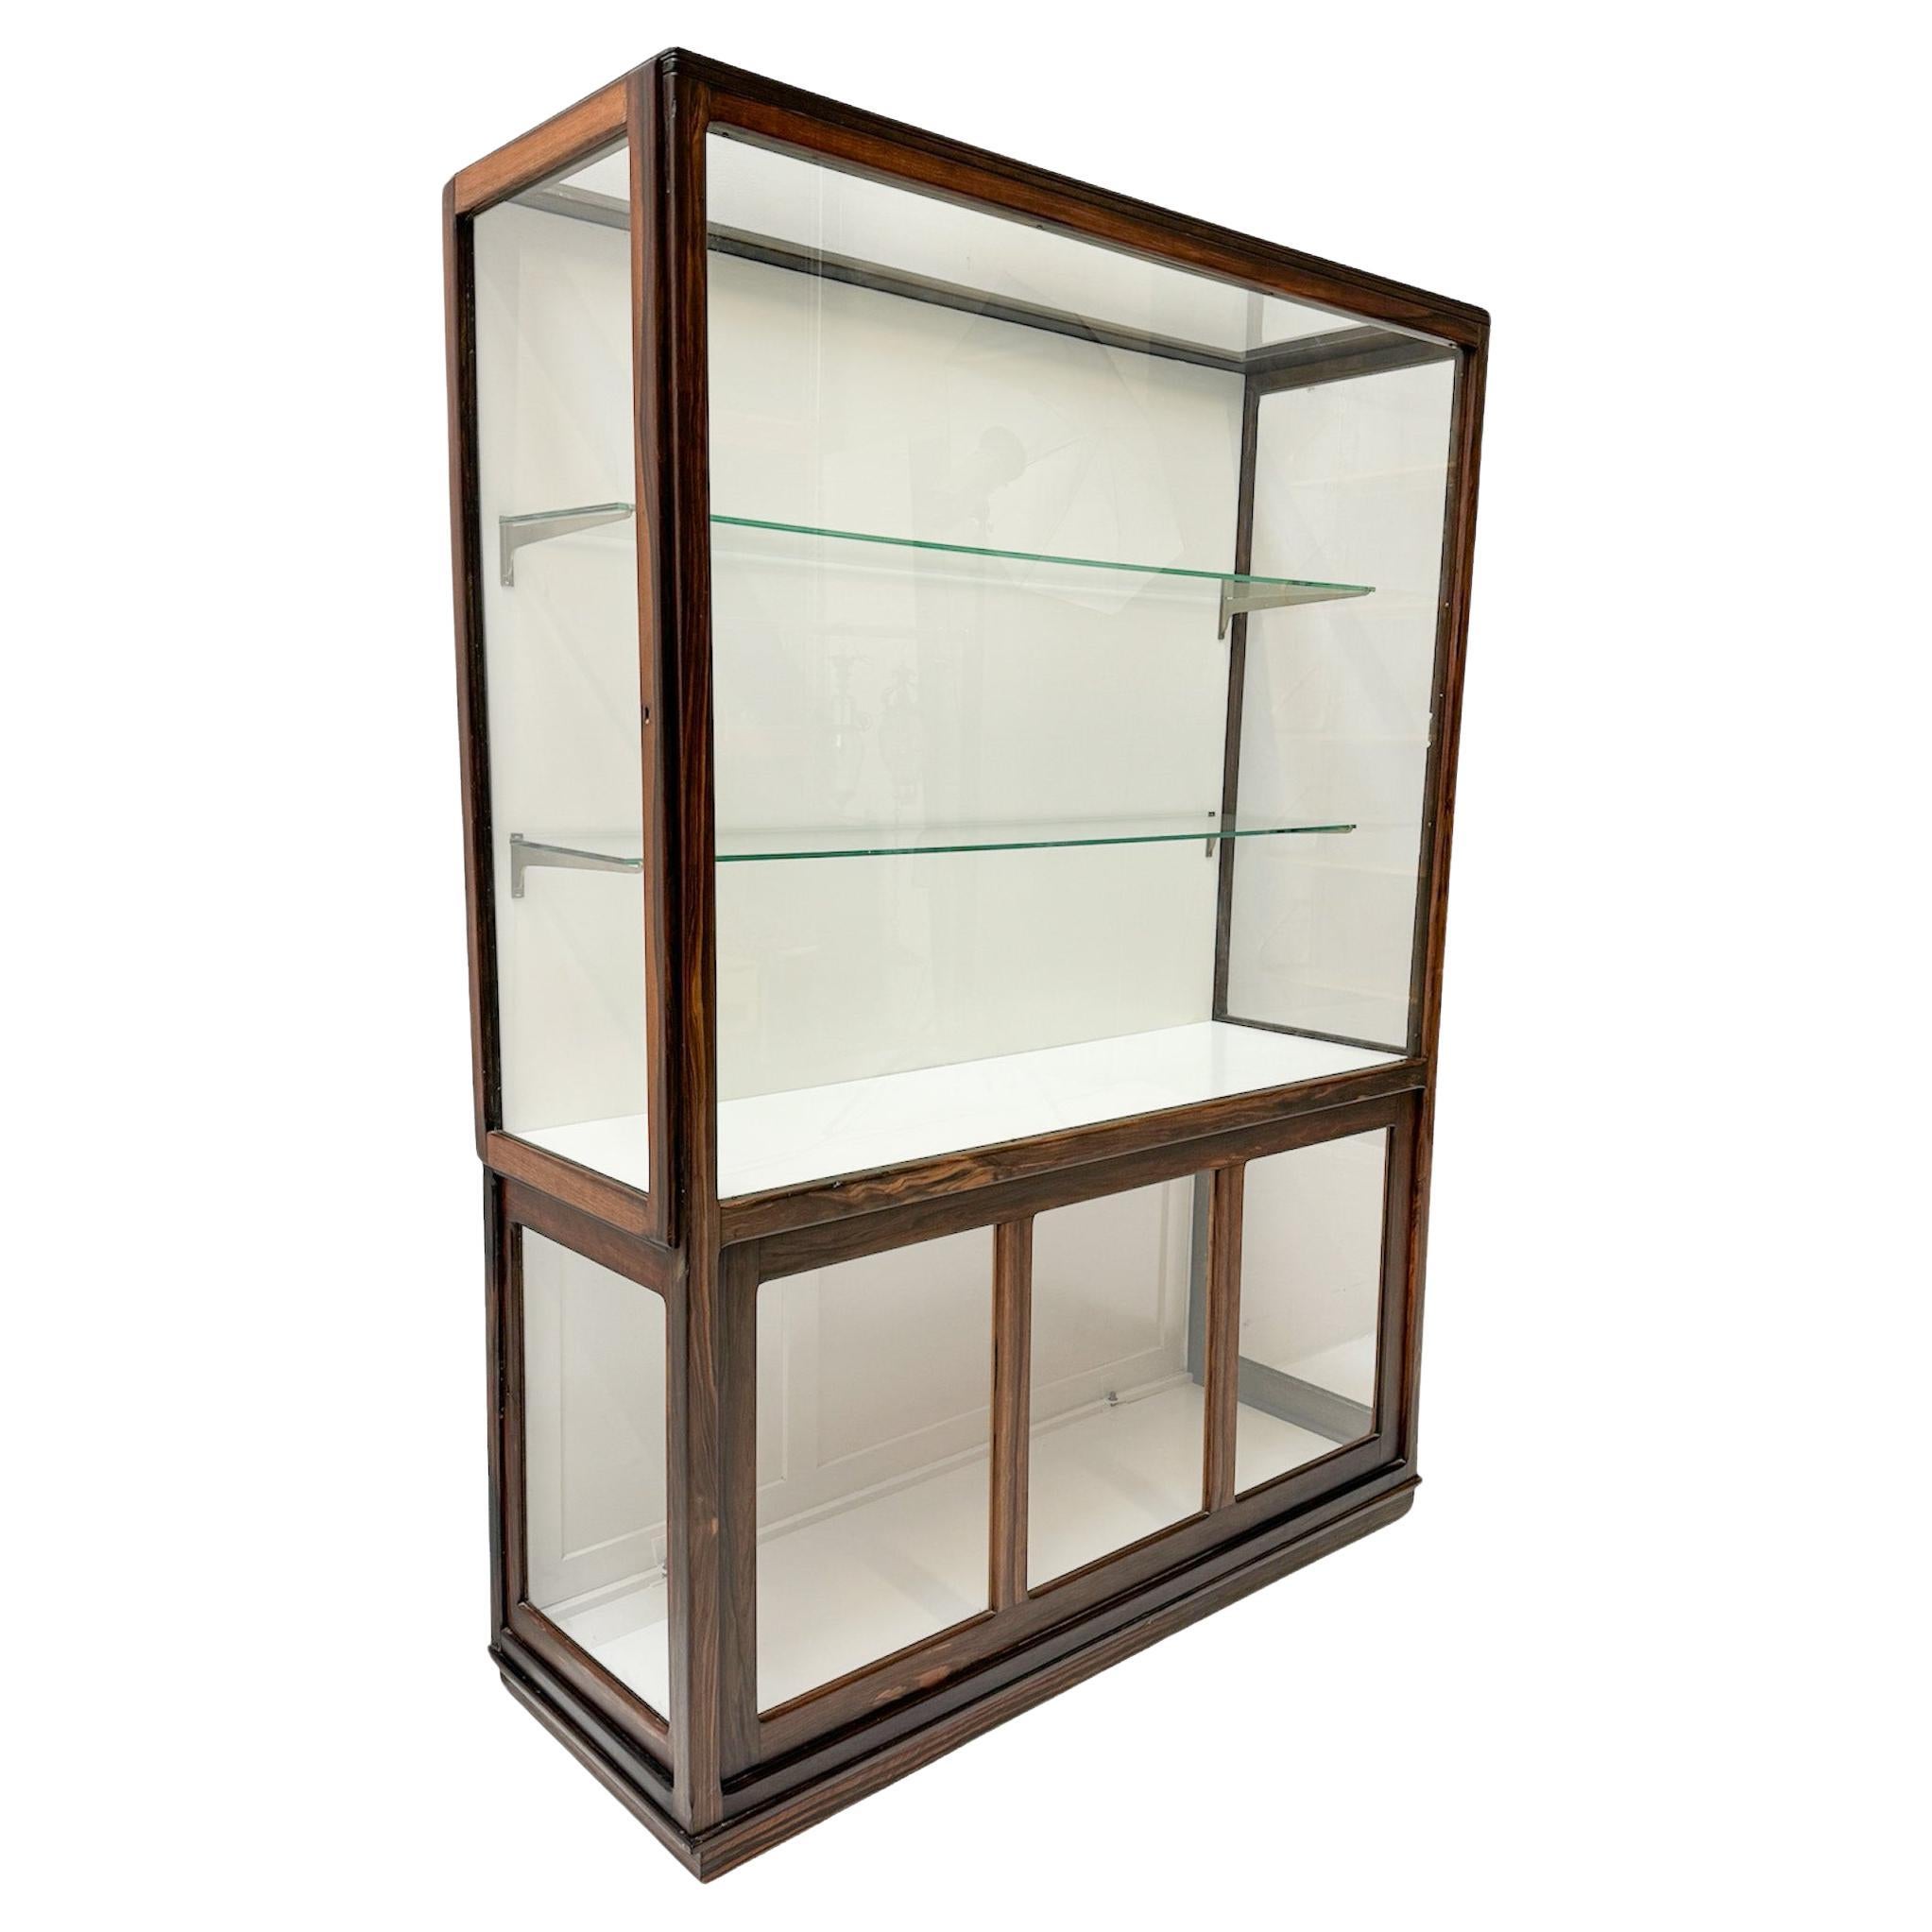 Macassar Art Deco Amsterdamse School Display Cabinet by Napoleon Le Grand, 1920s For Sale